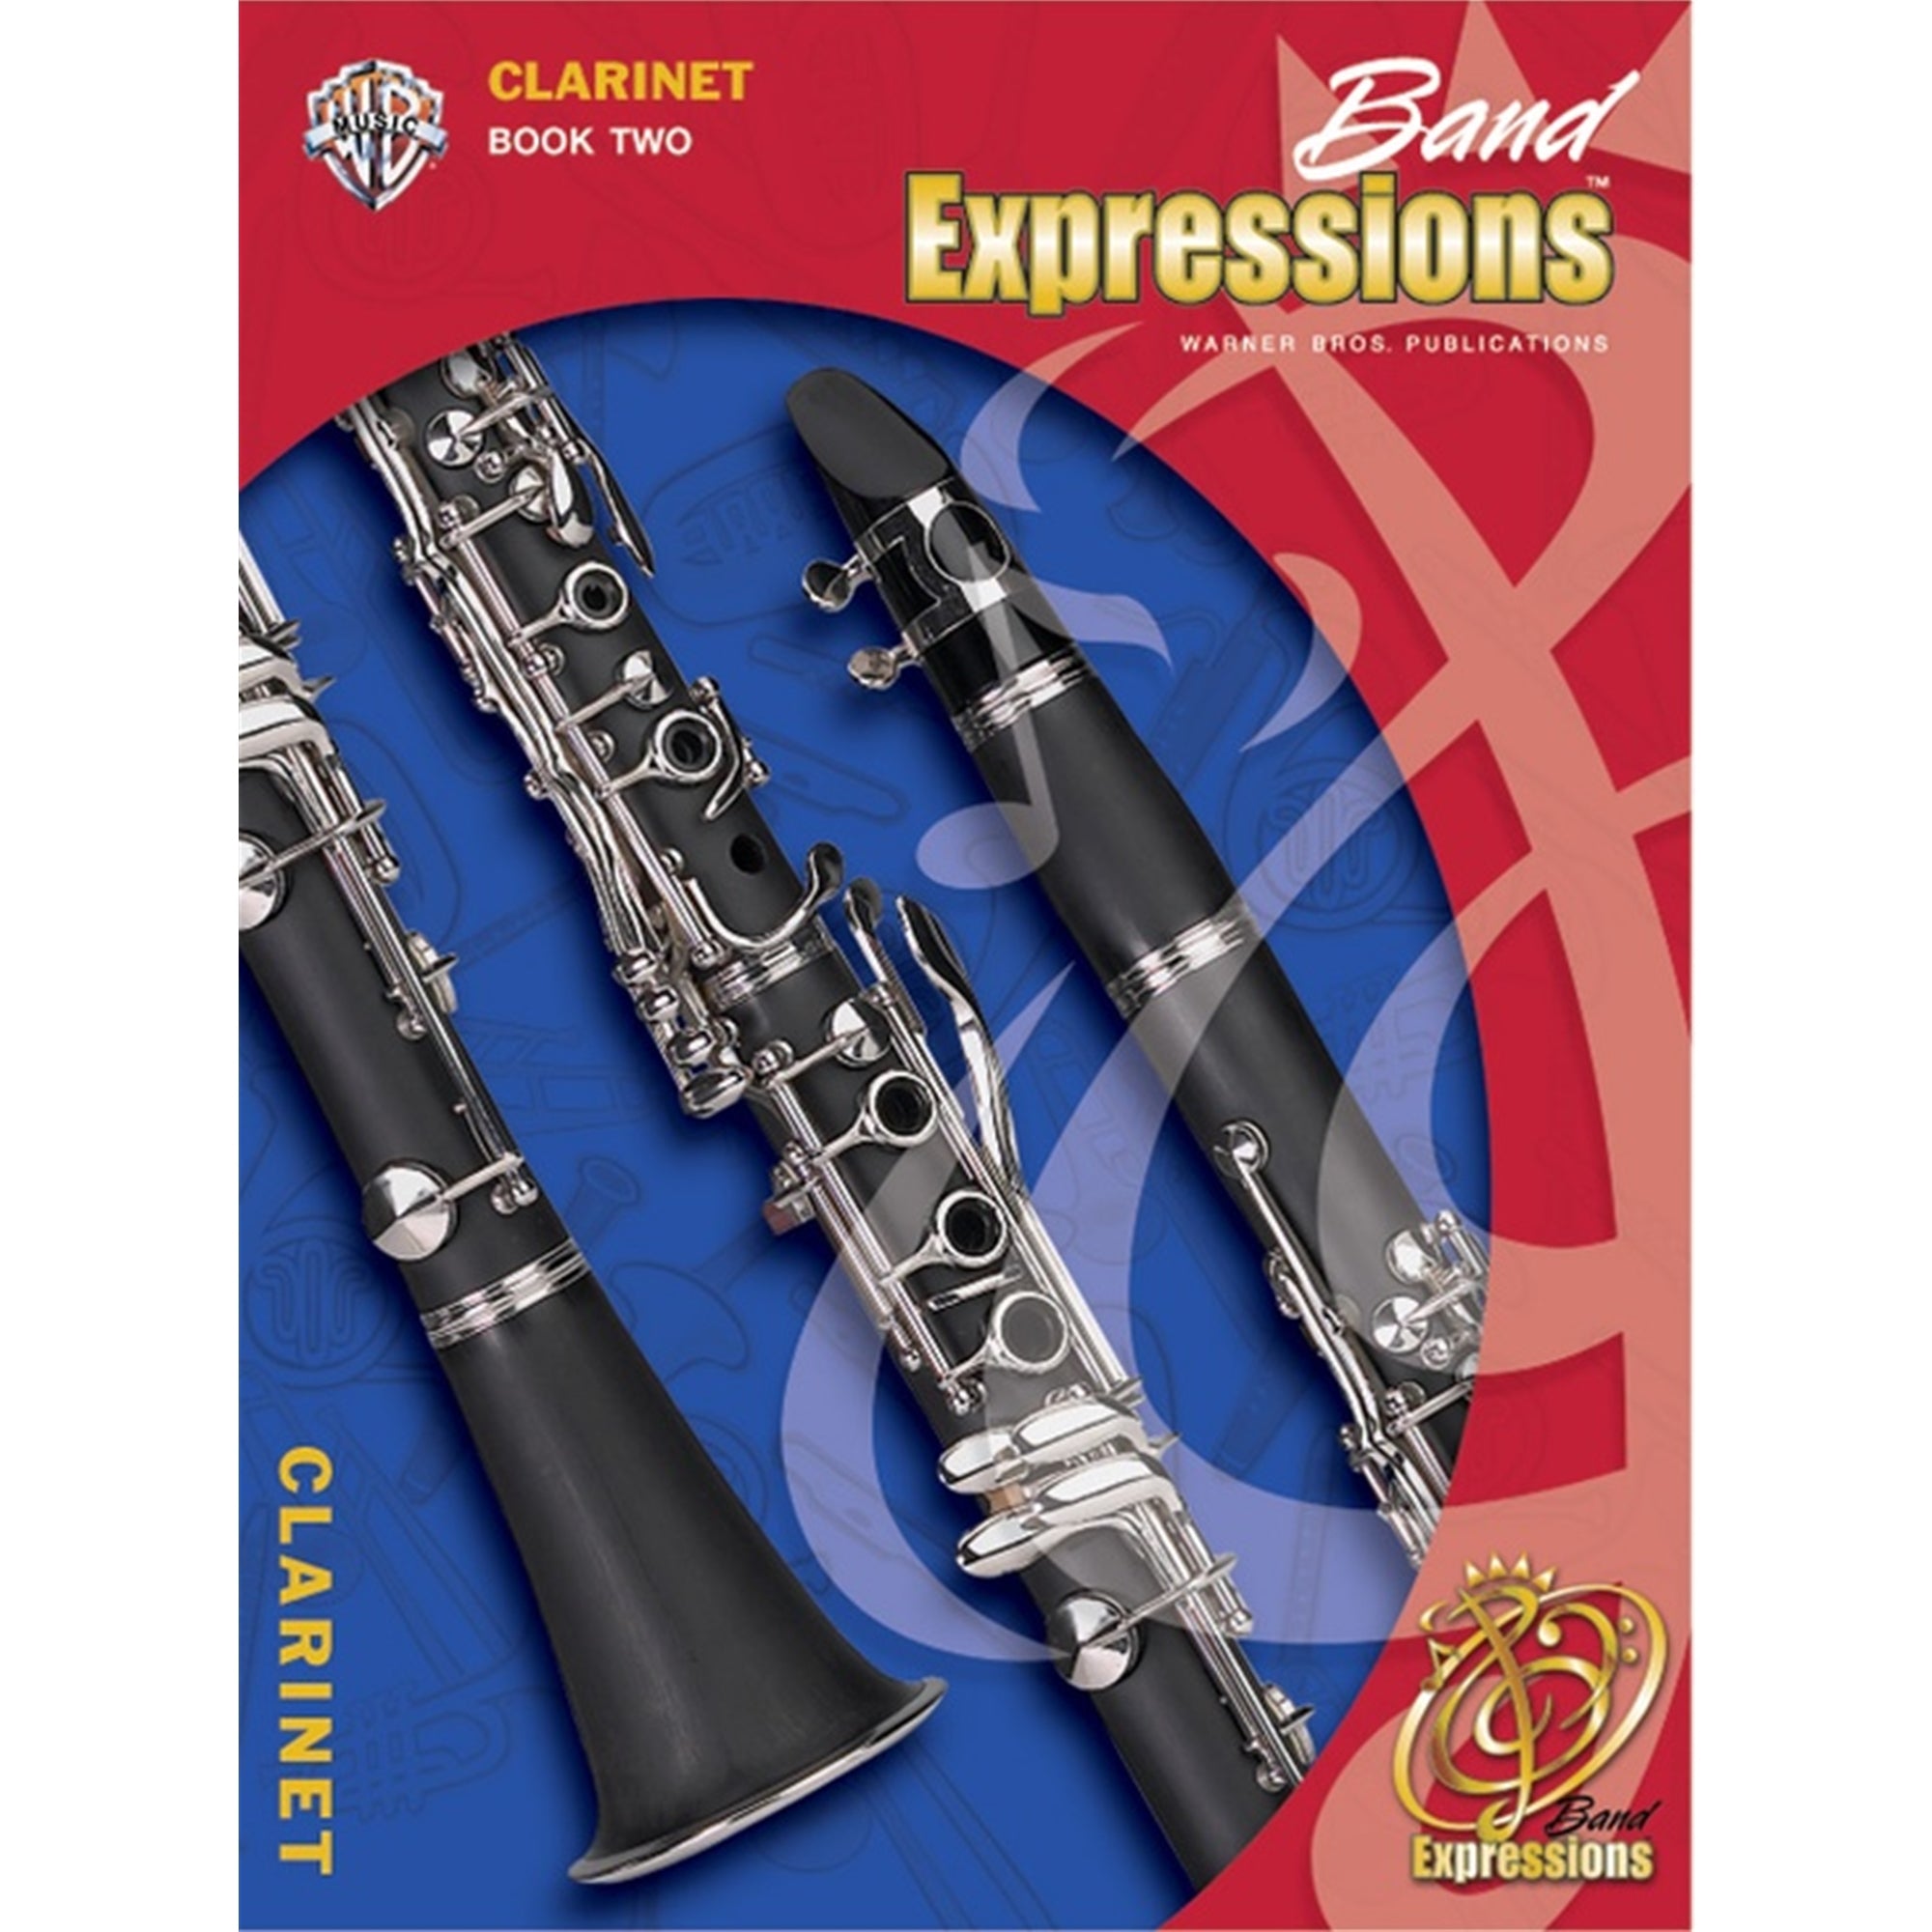 ALFRED 00EMCB2004CD Band Expressions , Book Two: Student Edition [Clarinet]